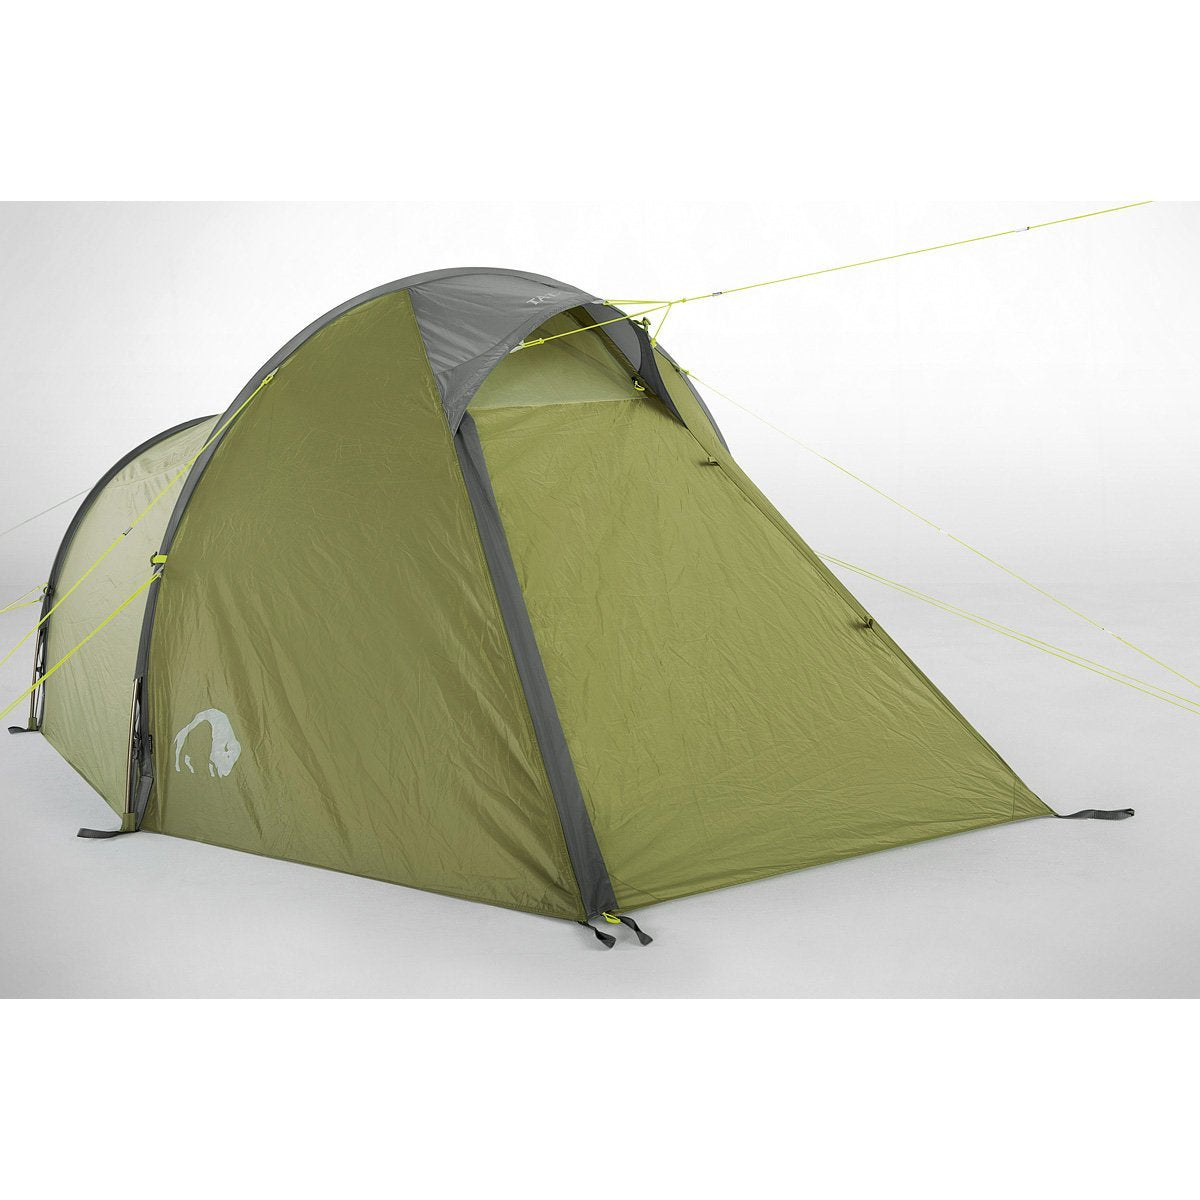 Tatonka Narvik 3 Light Olive 3 Persons Tent Outdoor and Survival Products Tatonka Tactical Gear Supplier Tactical Distributors Australia